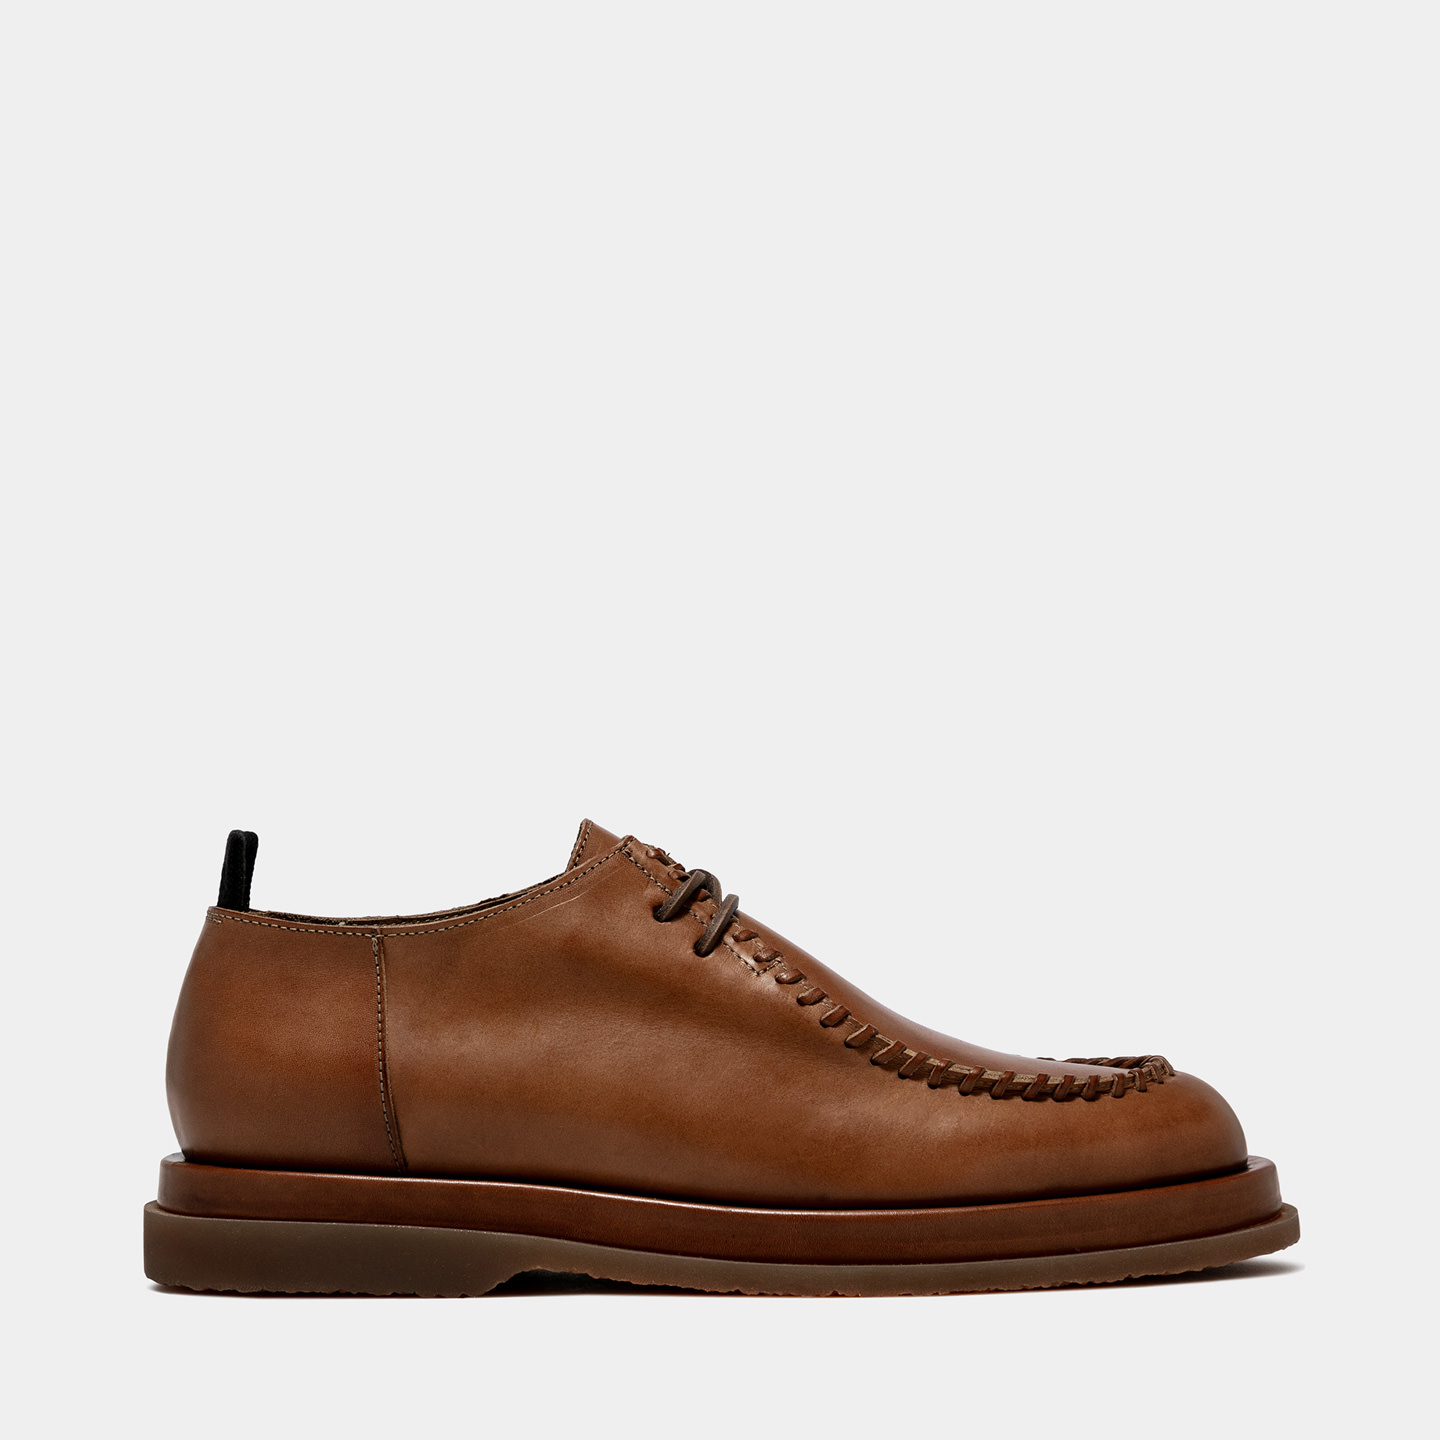 BUTTERO: LABORATORIO DERBY SHOES IN NATURAL COLOR LEATHER